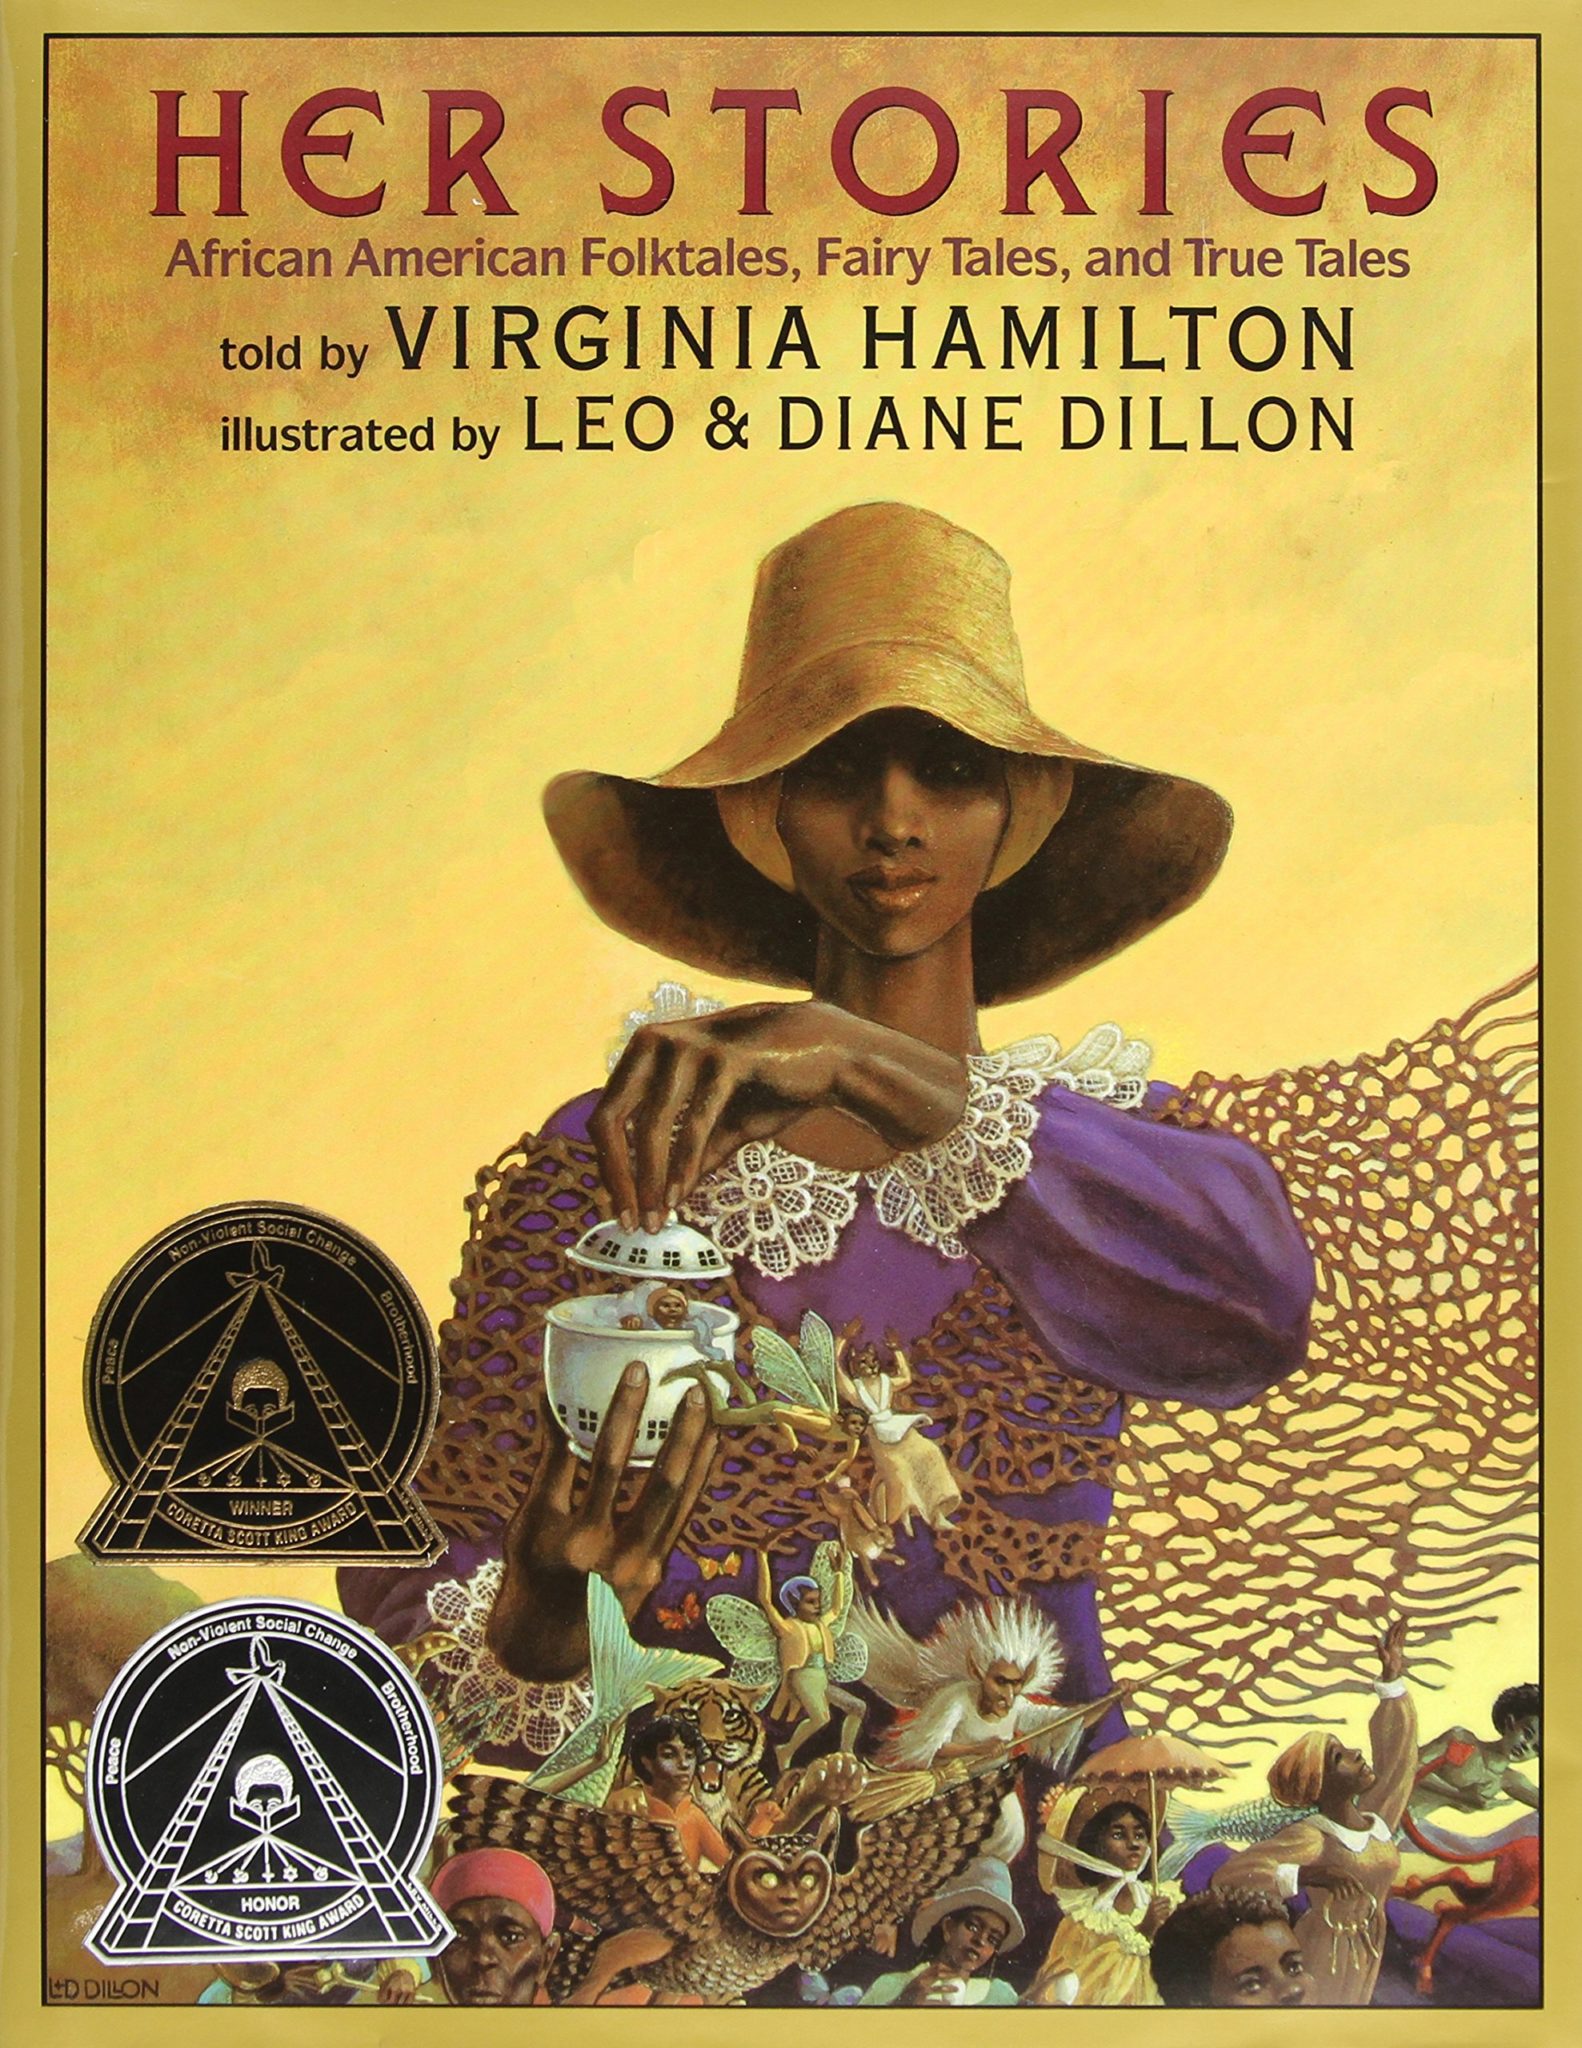 Cover of Her Stories featuring a Black woman wearing a floppy sun hat, purple dress with white lace on the collar and cuffs, and a knotted rope shawl. The woman holds a small white vessel in her hands, from which a cast of folktale characters and fantastic creatures in miniature are emerging.